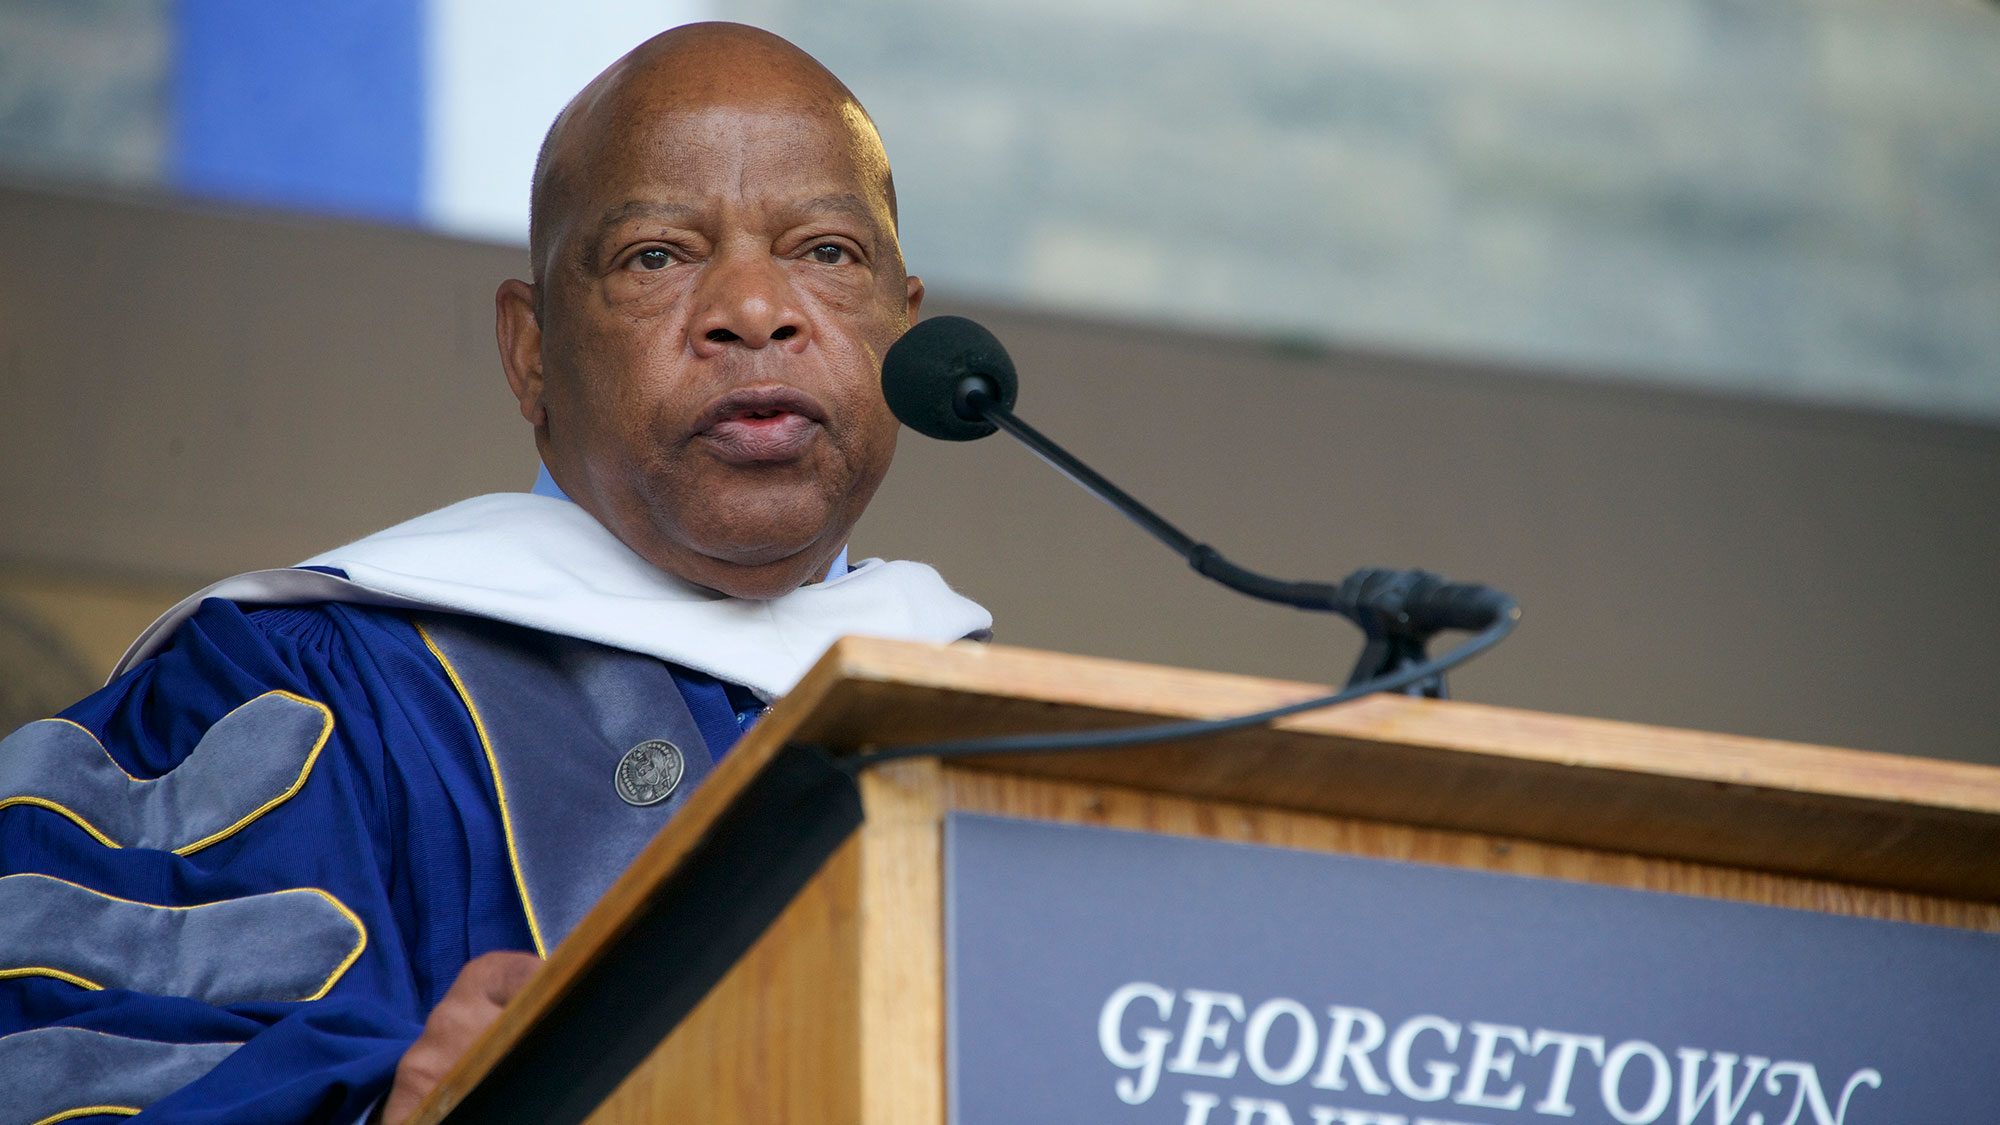 John Lewis stands at a lectern speaking into a microphone while wearing academic regalia.